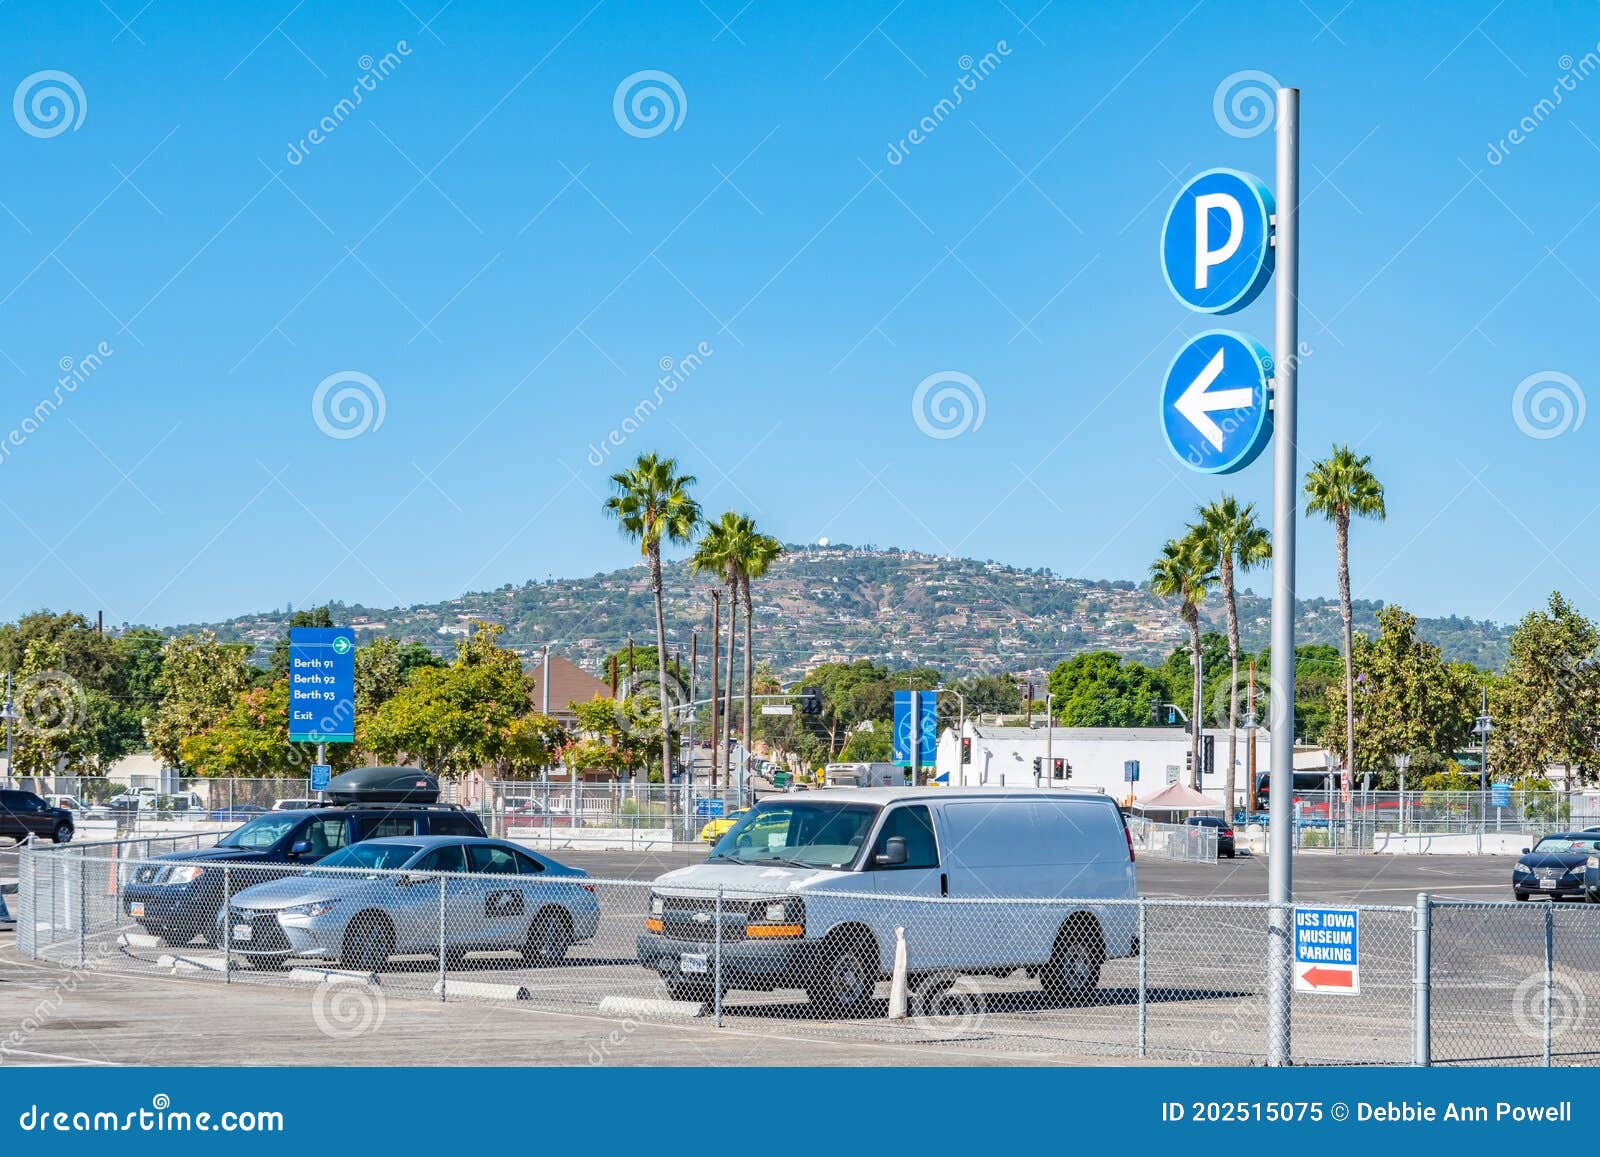 port of los angeles cruise parking